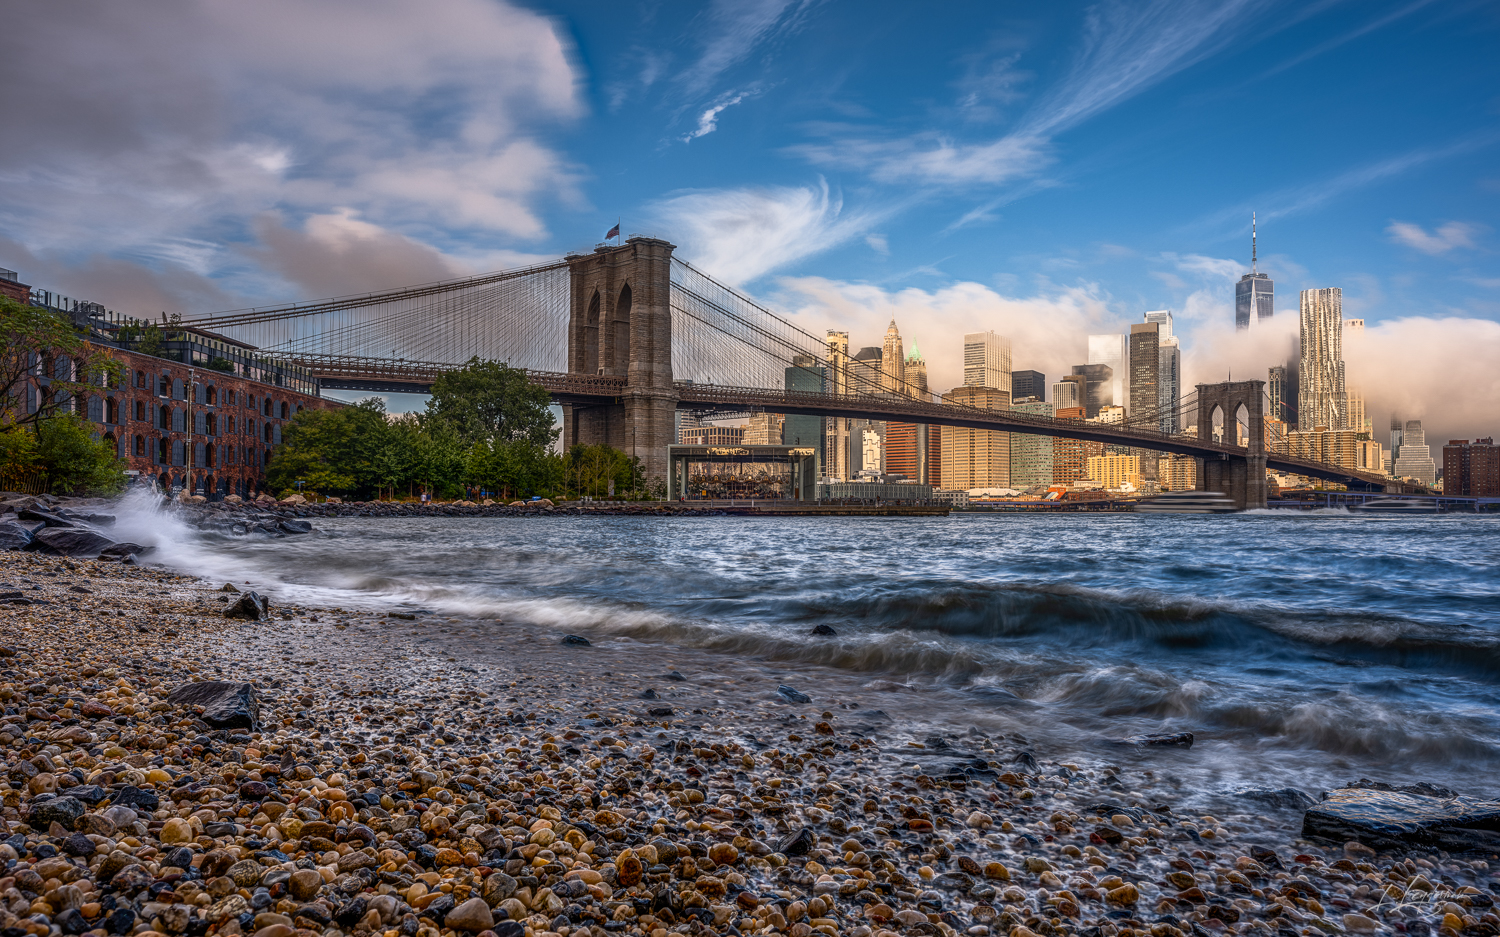 The Brooklyn Bridge stands as a steadfast passage to the bustling skyline, while the waters of the East River lap rhythmically...